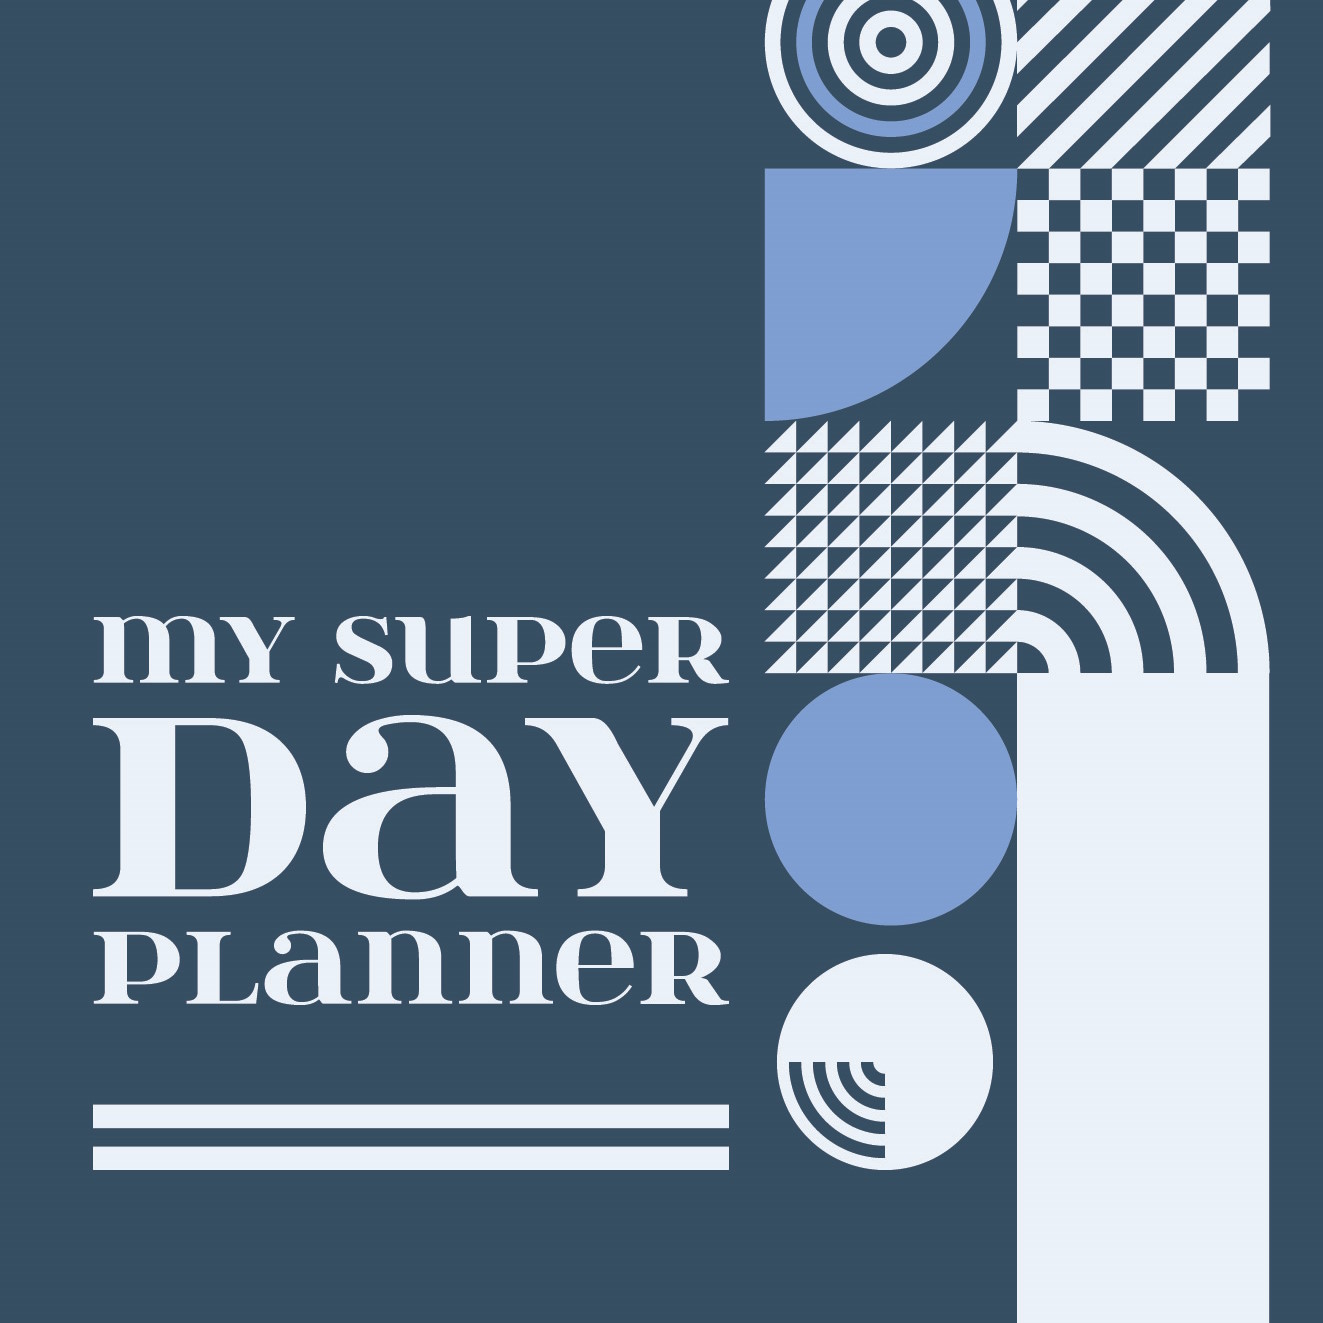 MY SUPER DAILY PLANNER